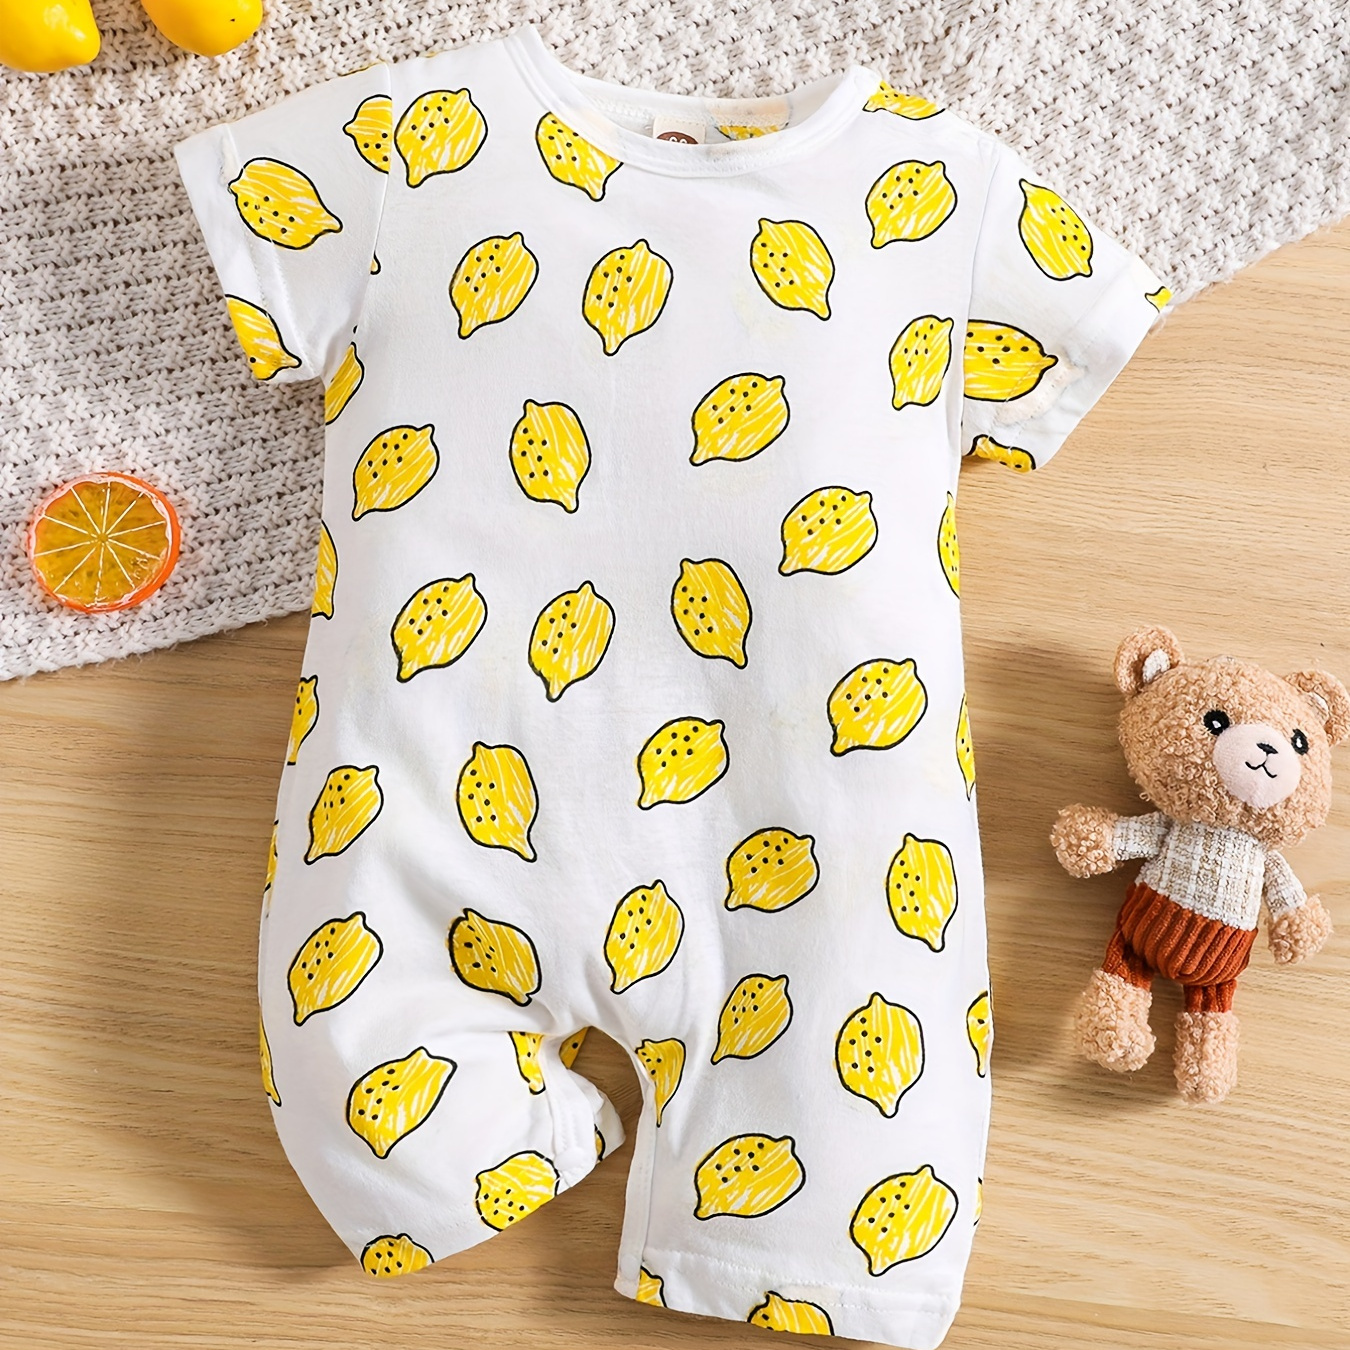 

Adorable Summer Lemon-printed Cotton Jumpsuit For Infants - Comfort And Style Combined!